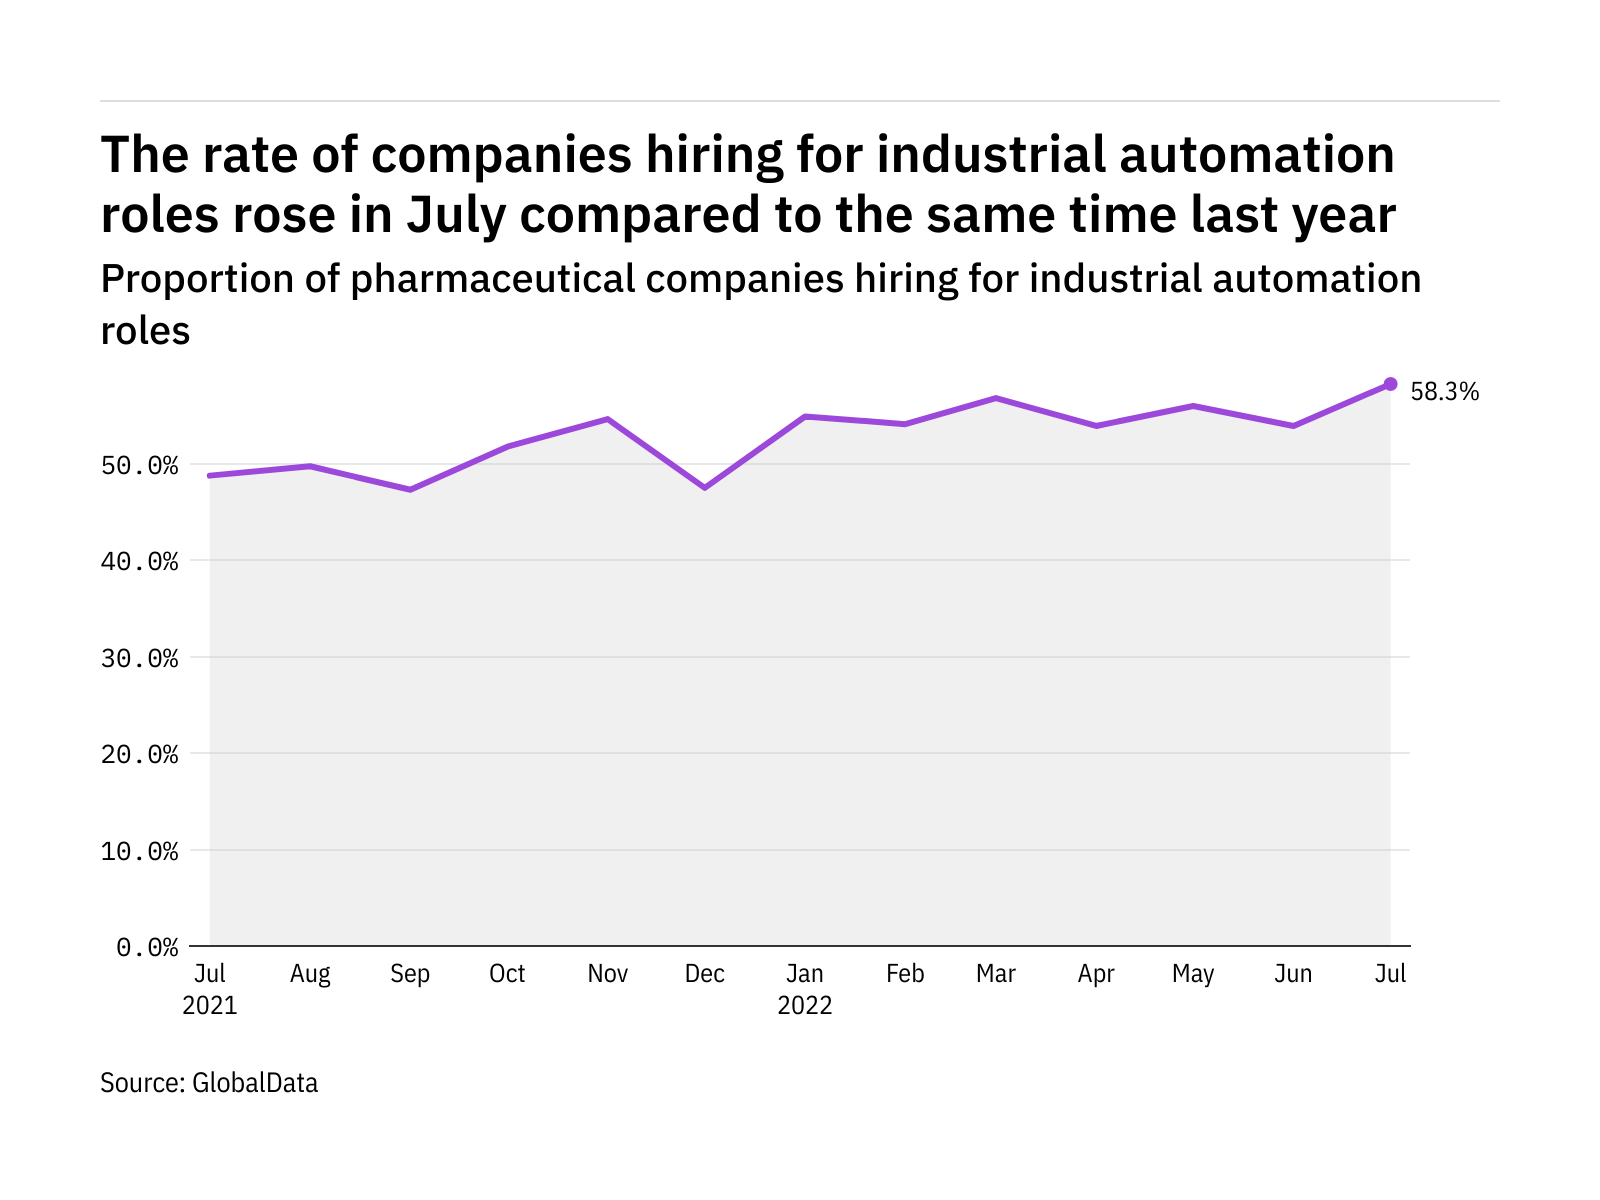 Industrial automation hiring levels in the pharmaceutical industry rose to a year-high in July 2022